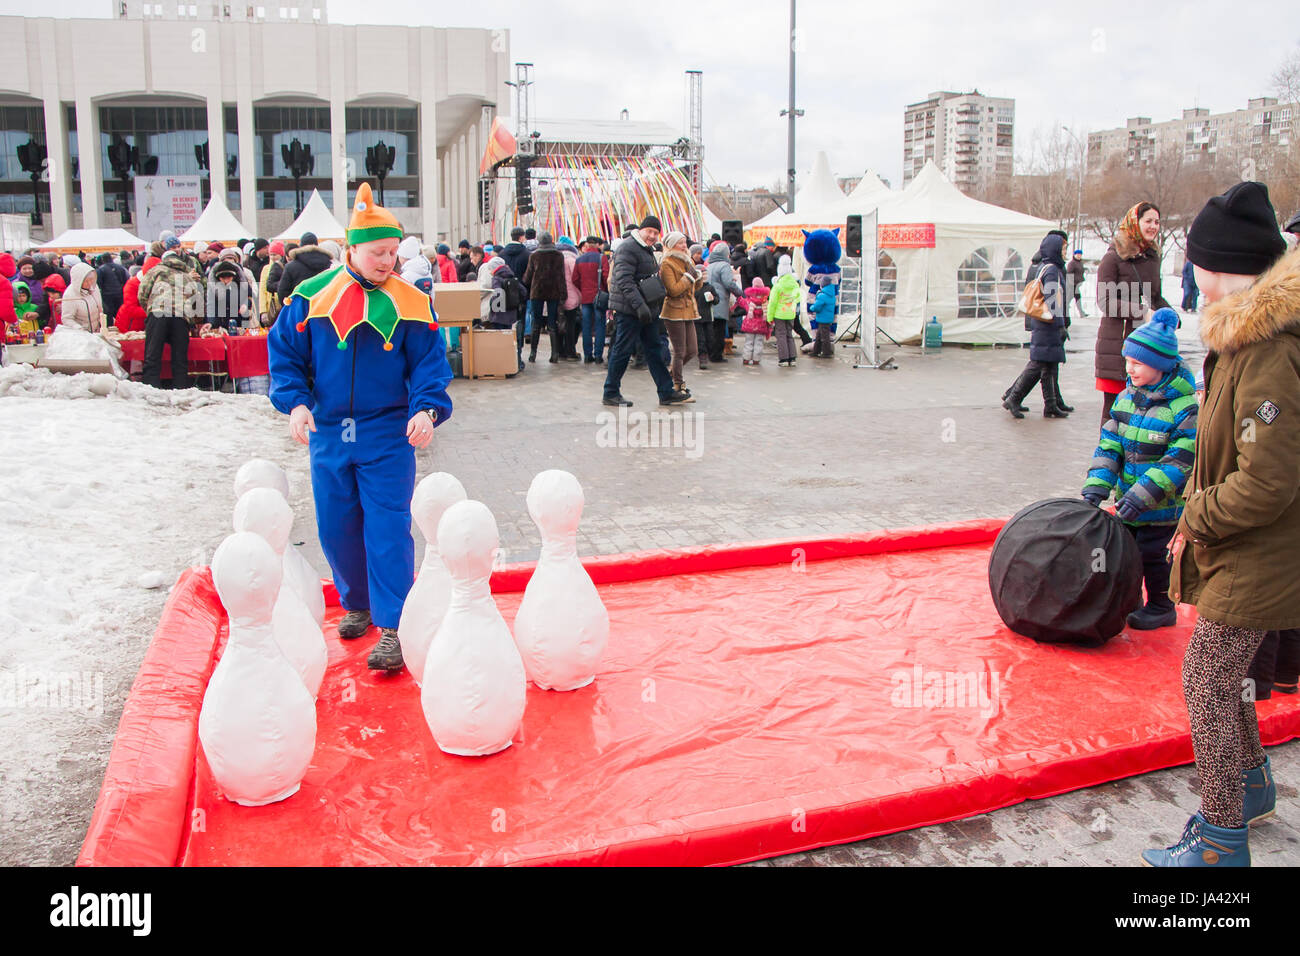 PERM, RUSSIA - March 13, 2016: Children playing skittles at the celebration of Carnival Stock Photo